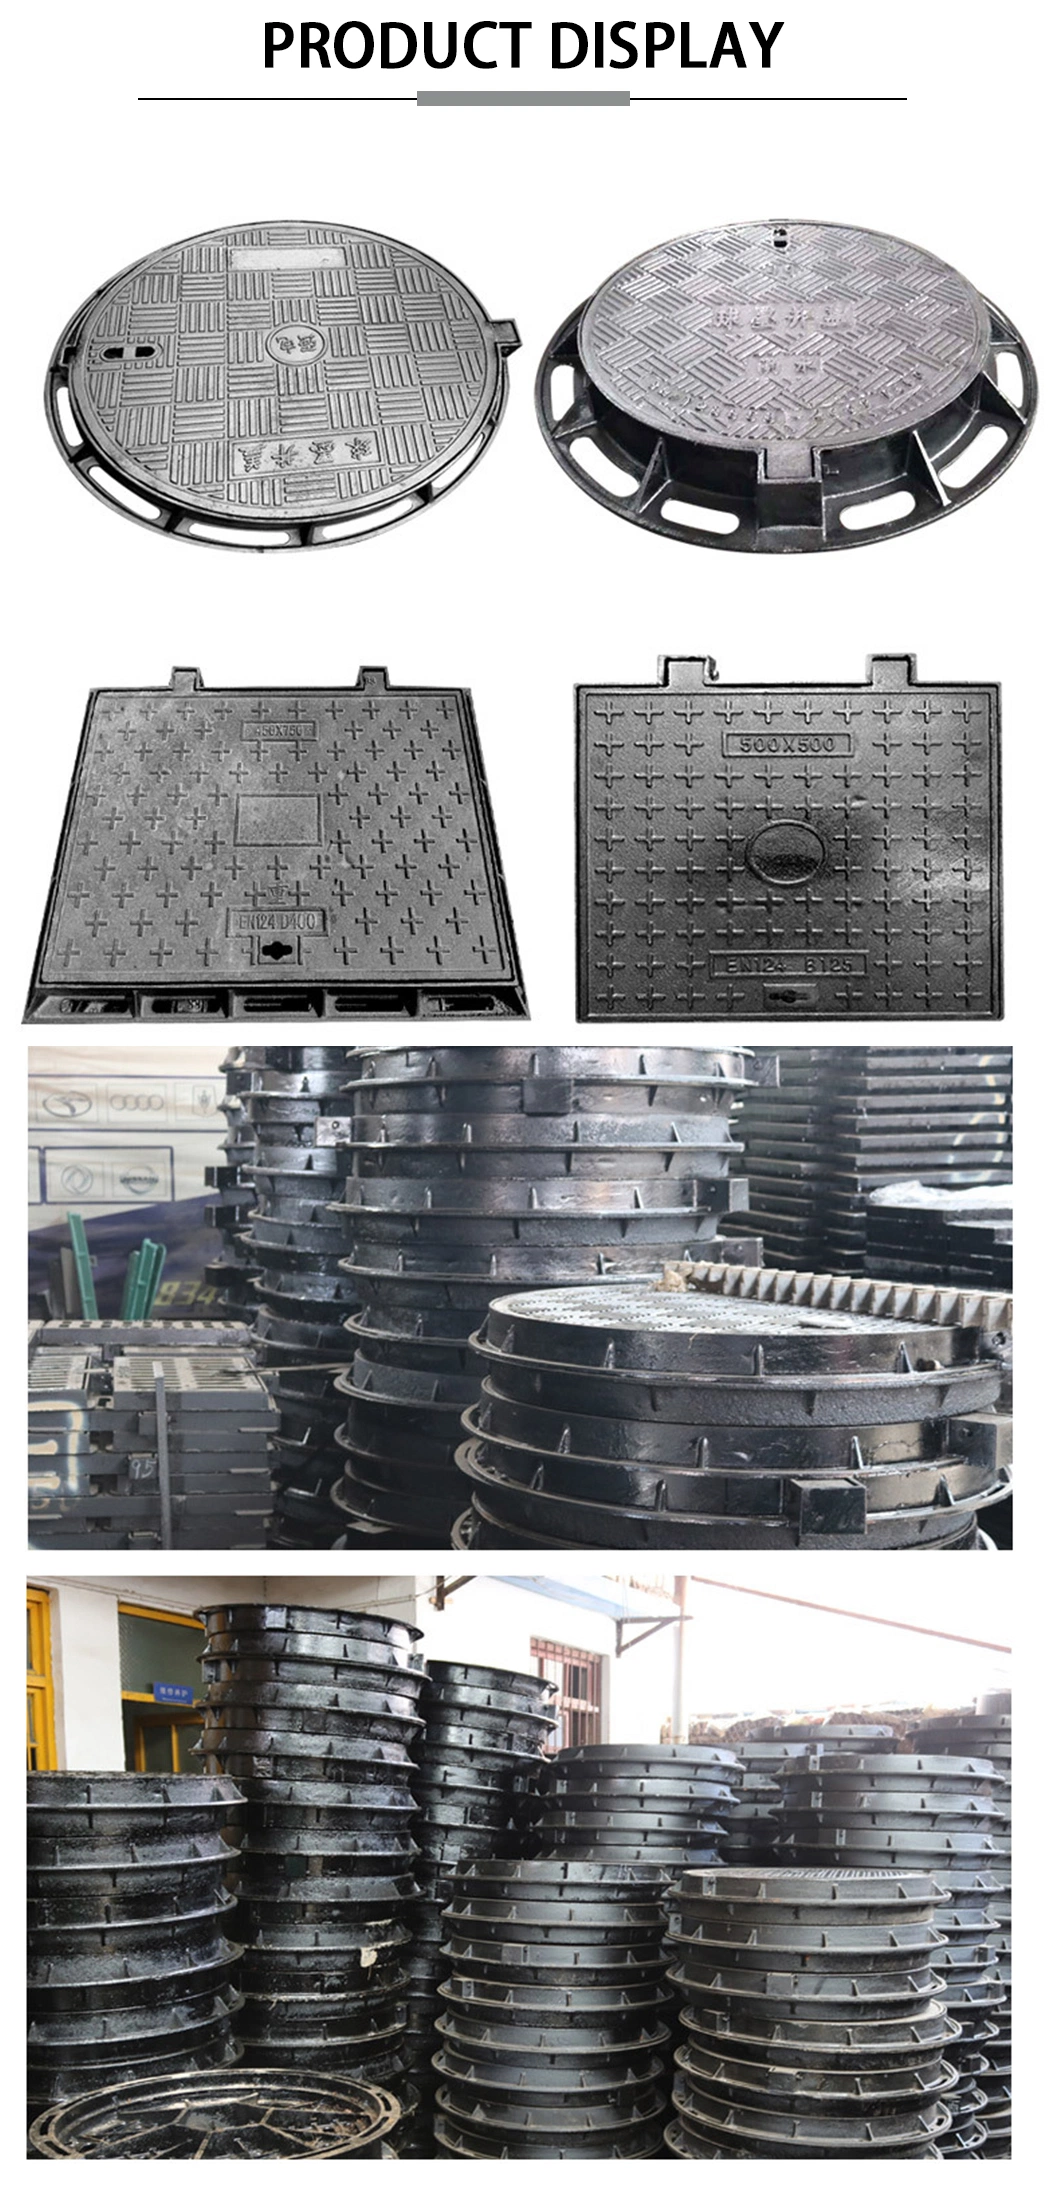 OEM En124 A15 B125 C250 Class D400 E600 F900 Round/Square Epoxy Coating Ductile Cast Iron Manhole Cover with Frame